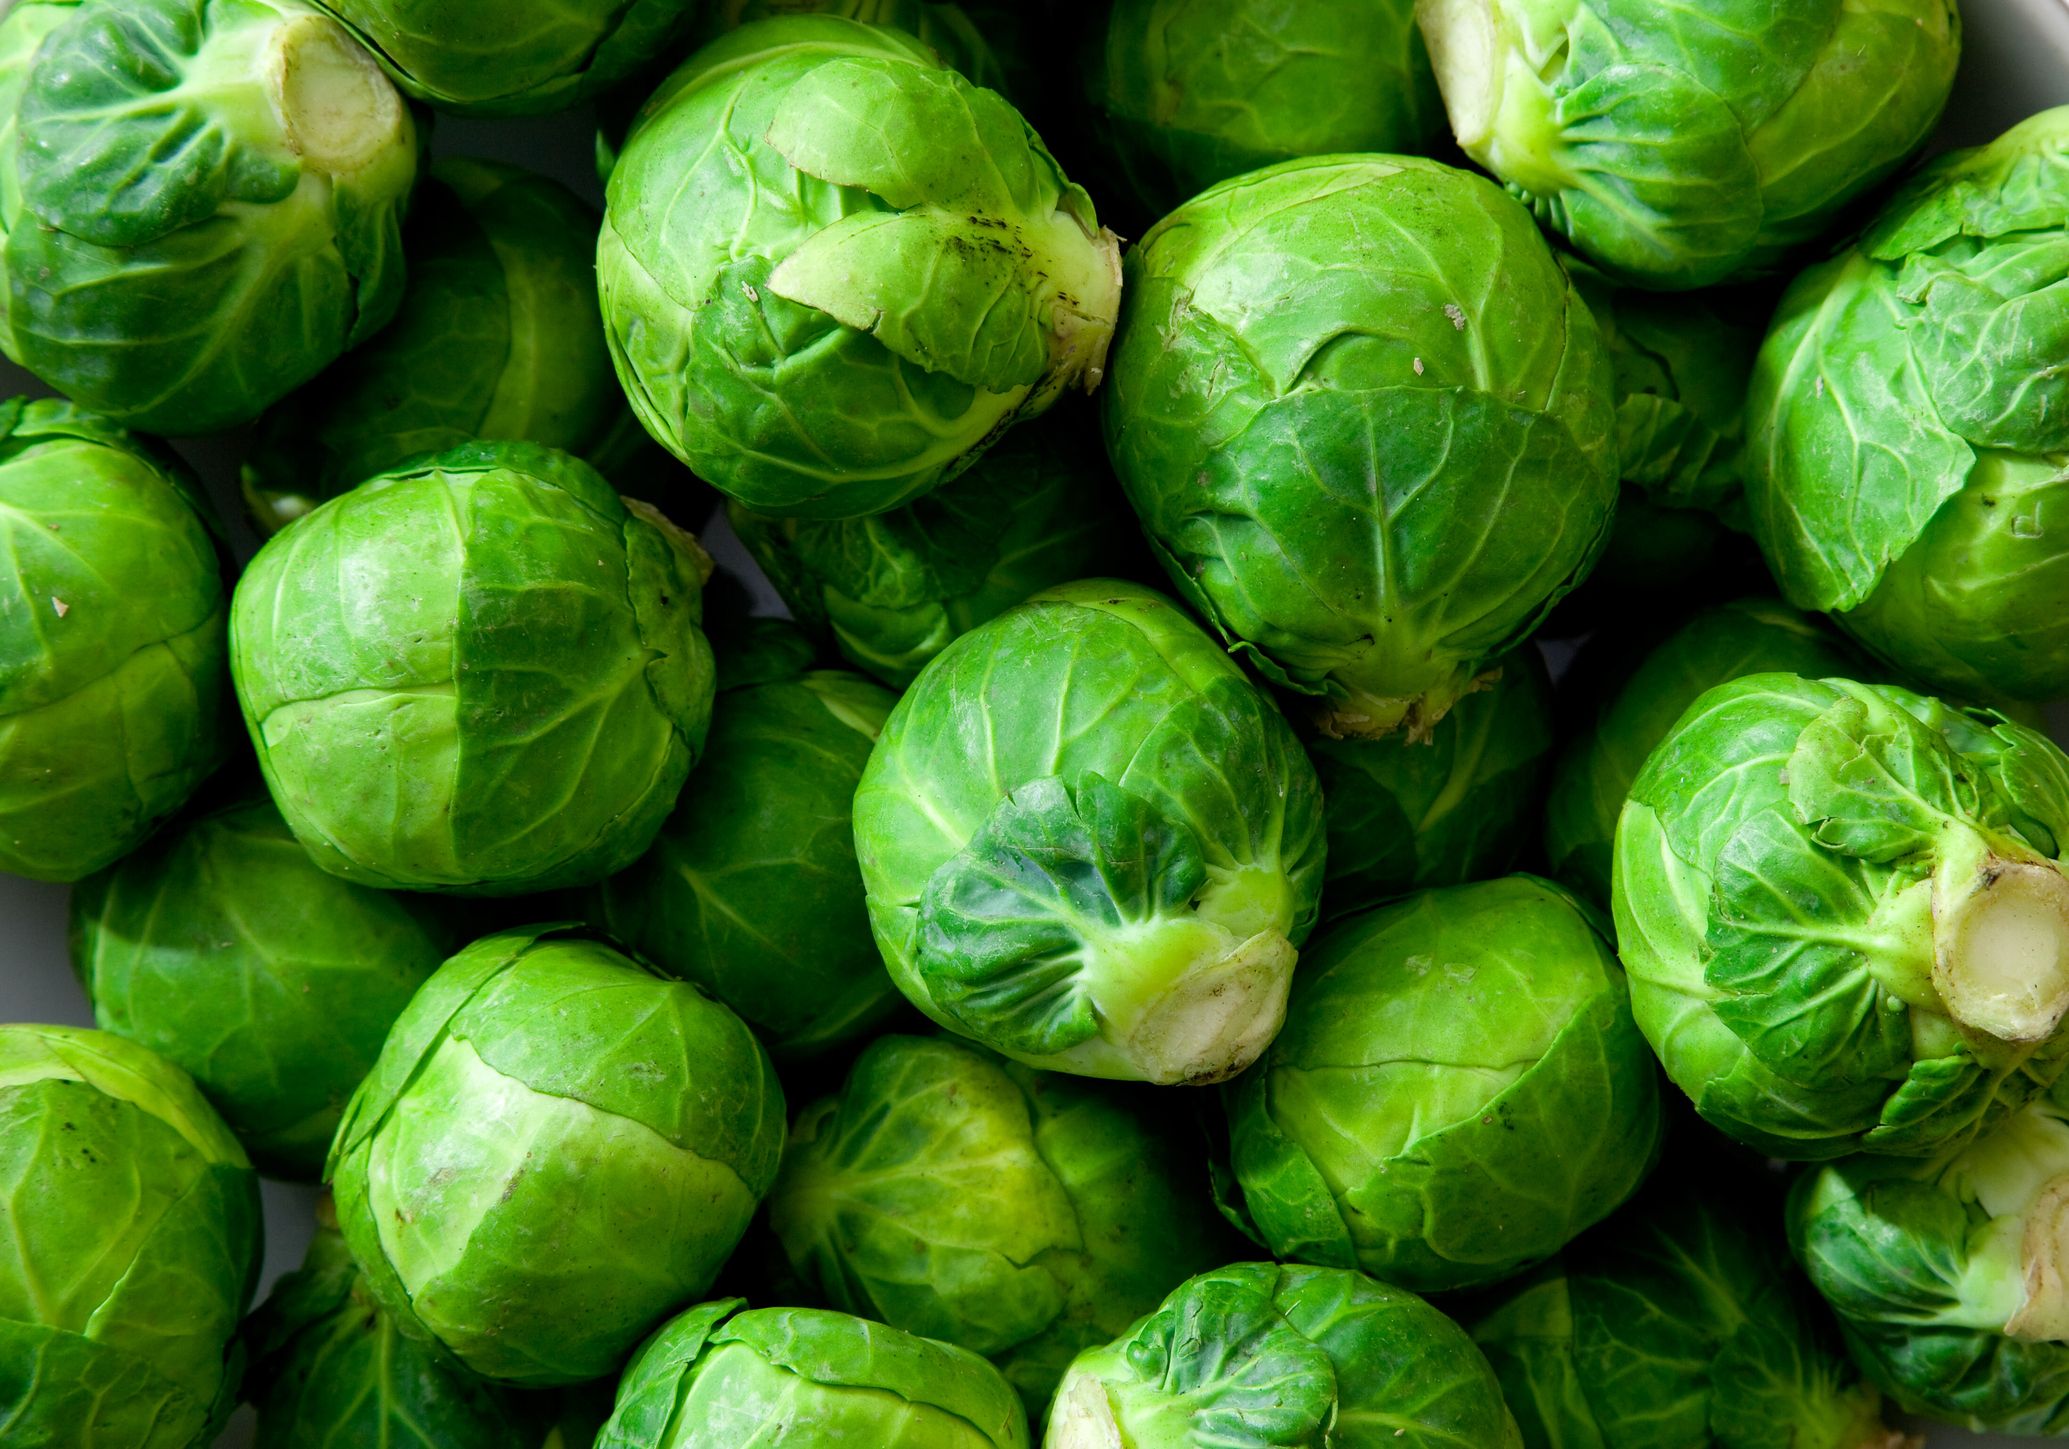 A dish full of uncooked, unpeeled sprouts